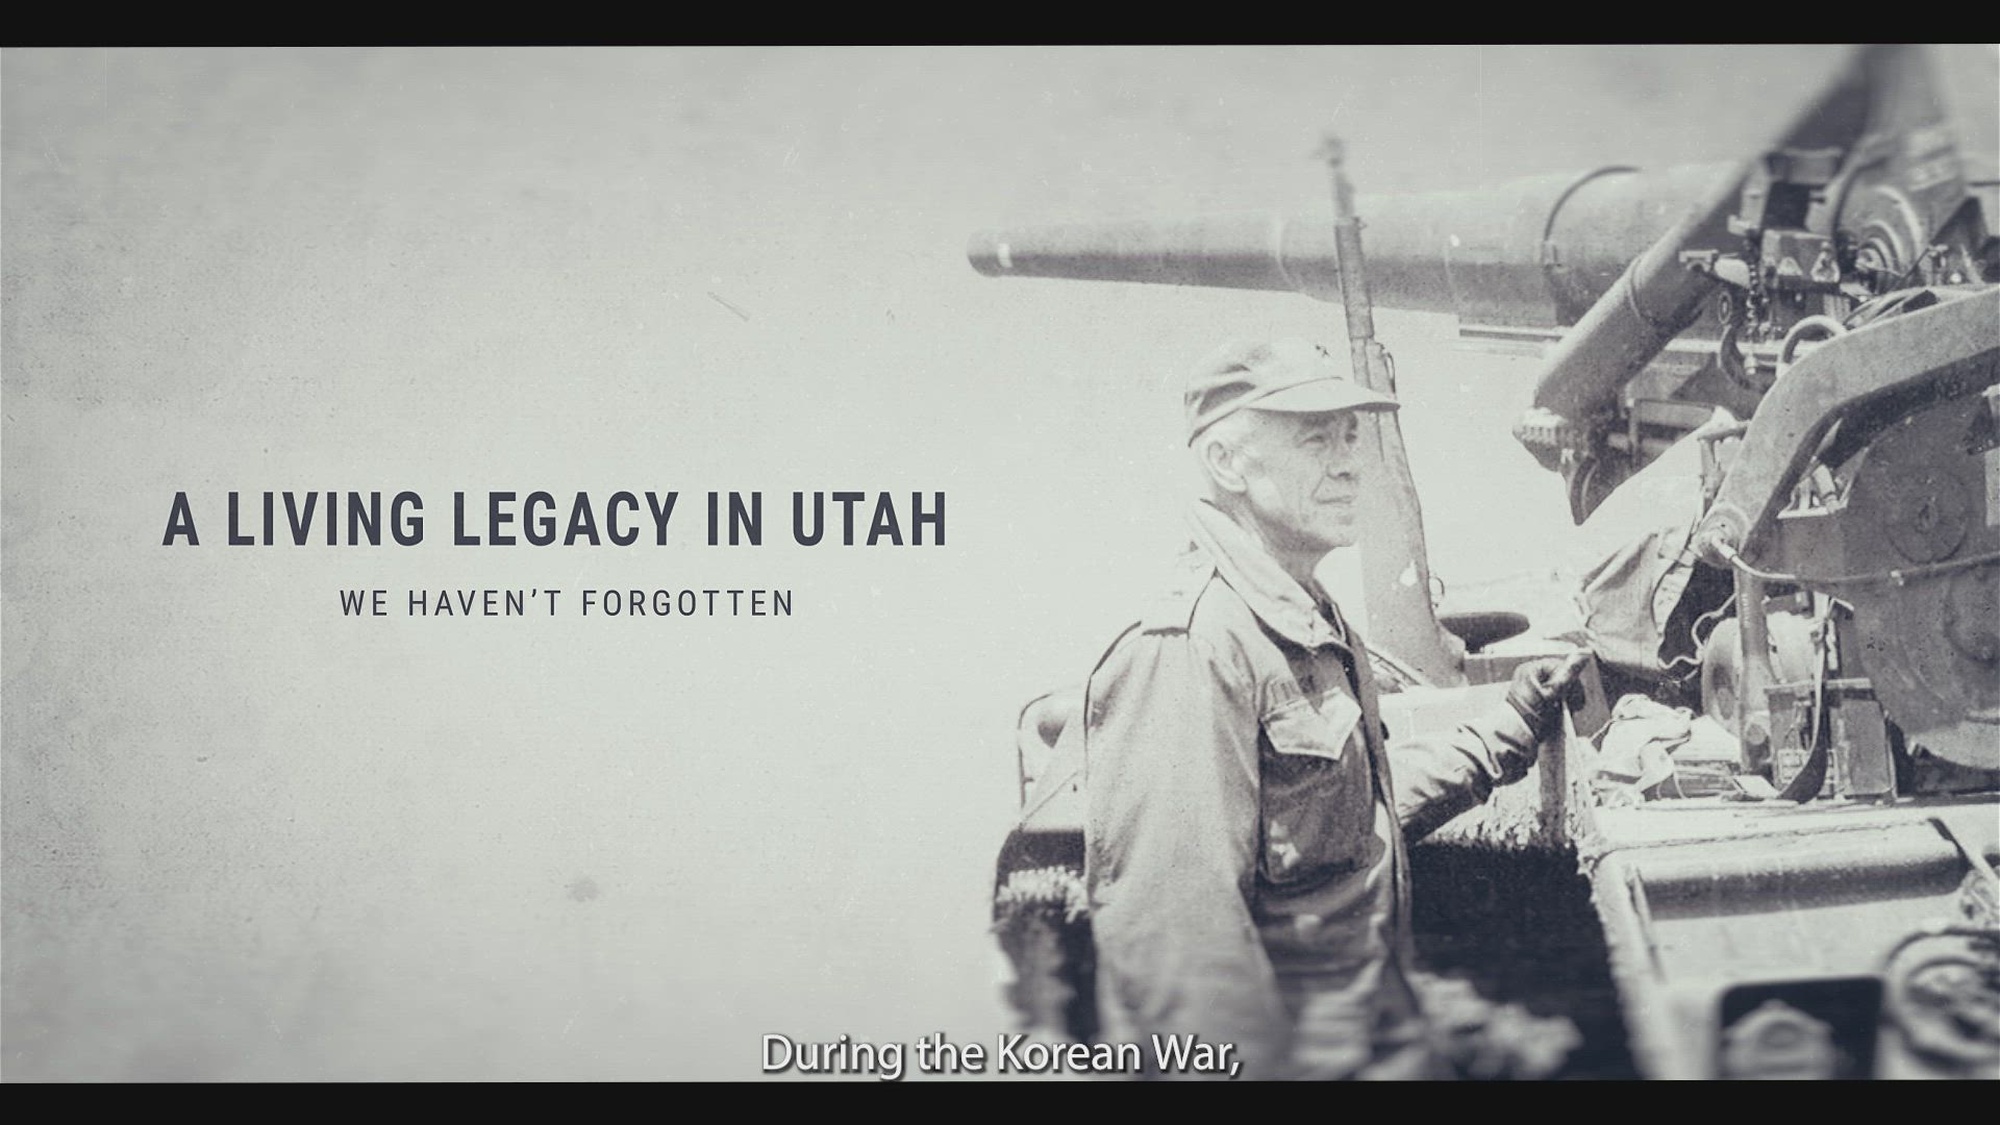 A video production about the Korean War legacy left behind and remembered in Utah. The video was produced to be shown during the Utah National Guard's 67th Annual Veterans Day Concert, which was held in the Salt Lake City Tabernacle on Temple Square, Nov. 11, 2022.